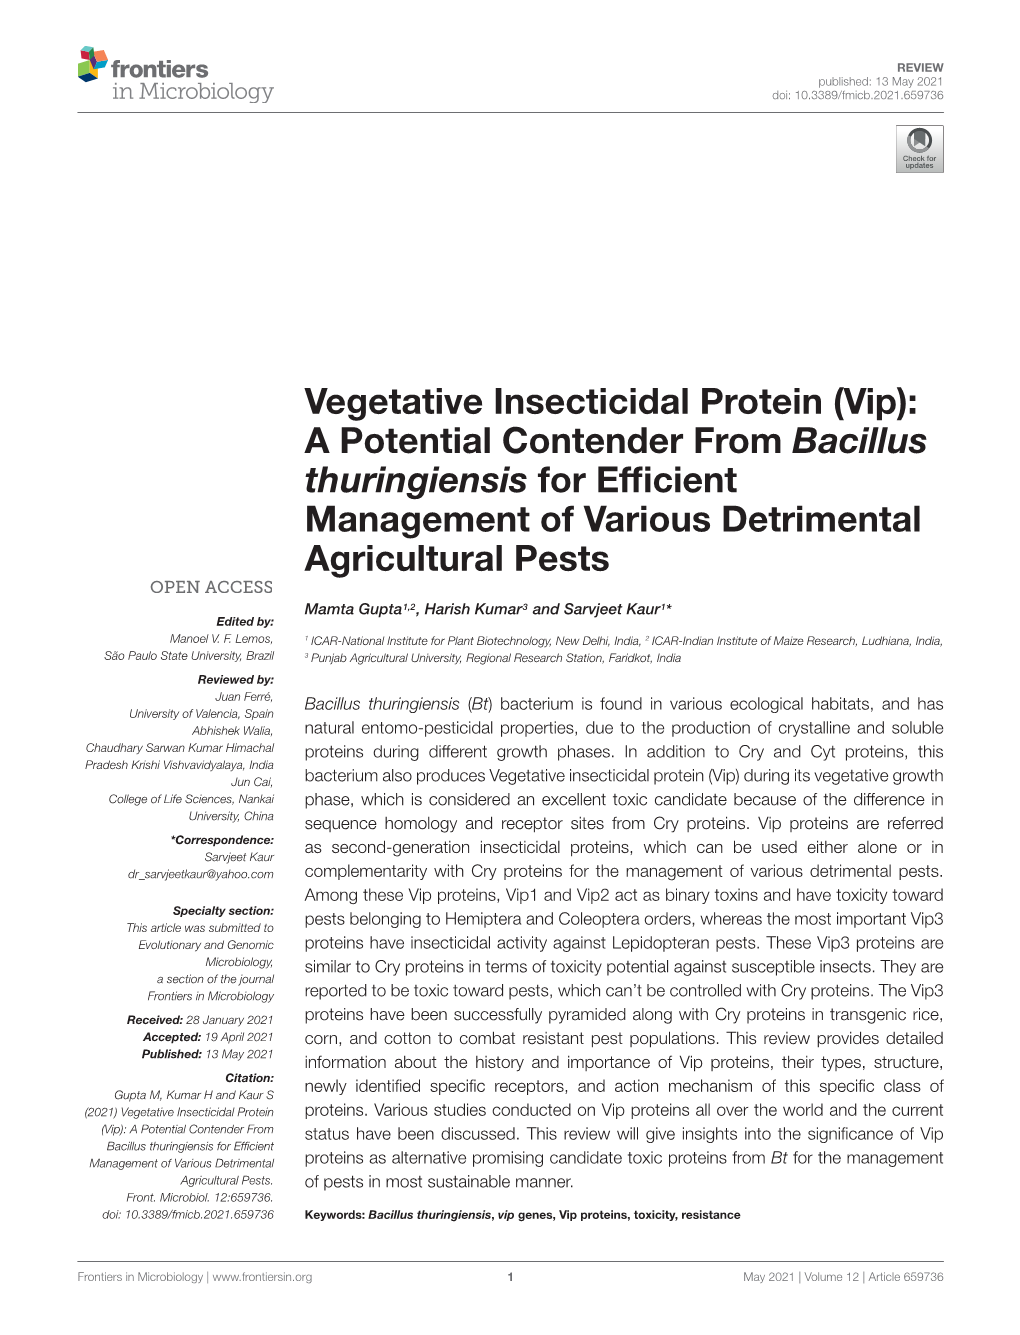 Vegetative Insecticidal Protein (Vip): a Potential Contender from Bacillus Thuringiensis for Efﬁcient Management of Various Detrimental Agricultural Pests